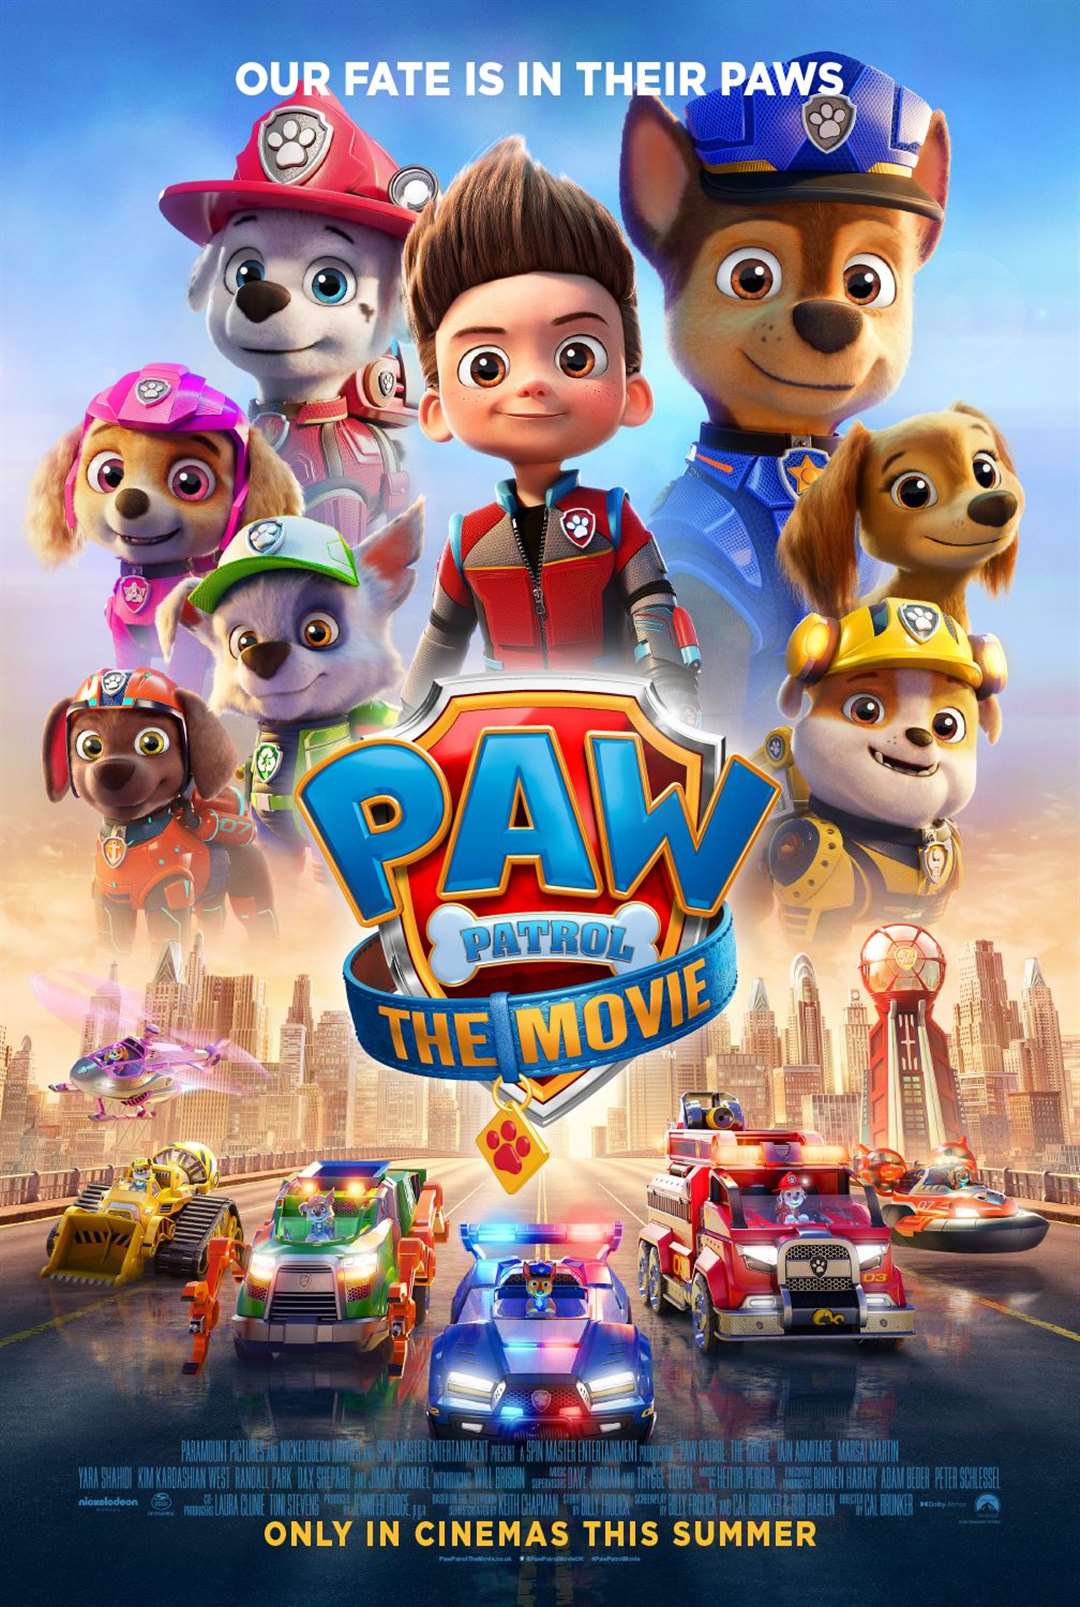 The movie poster for PAW Patrol.